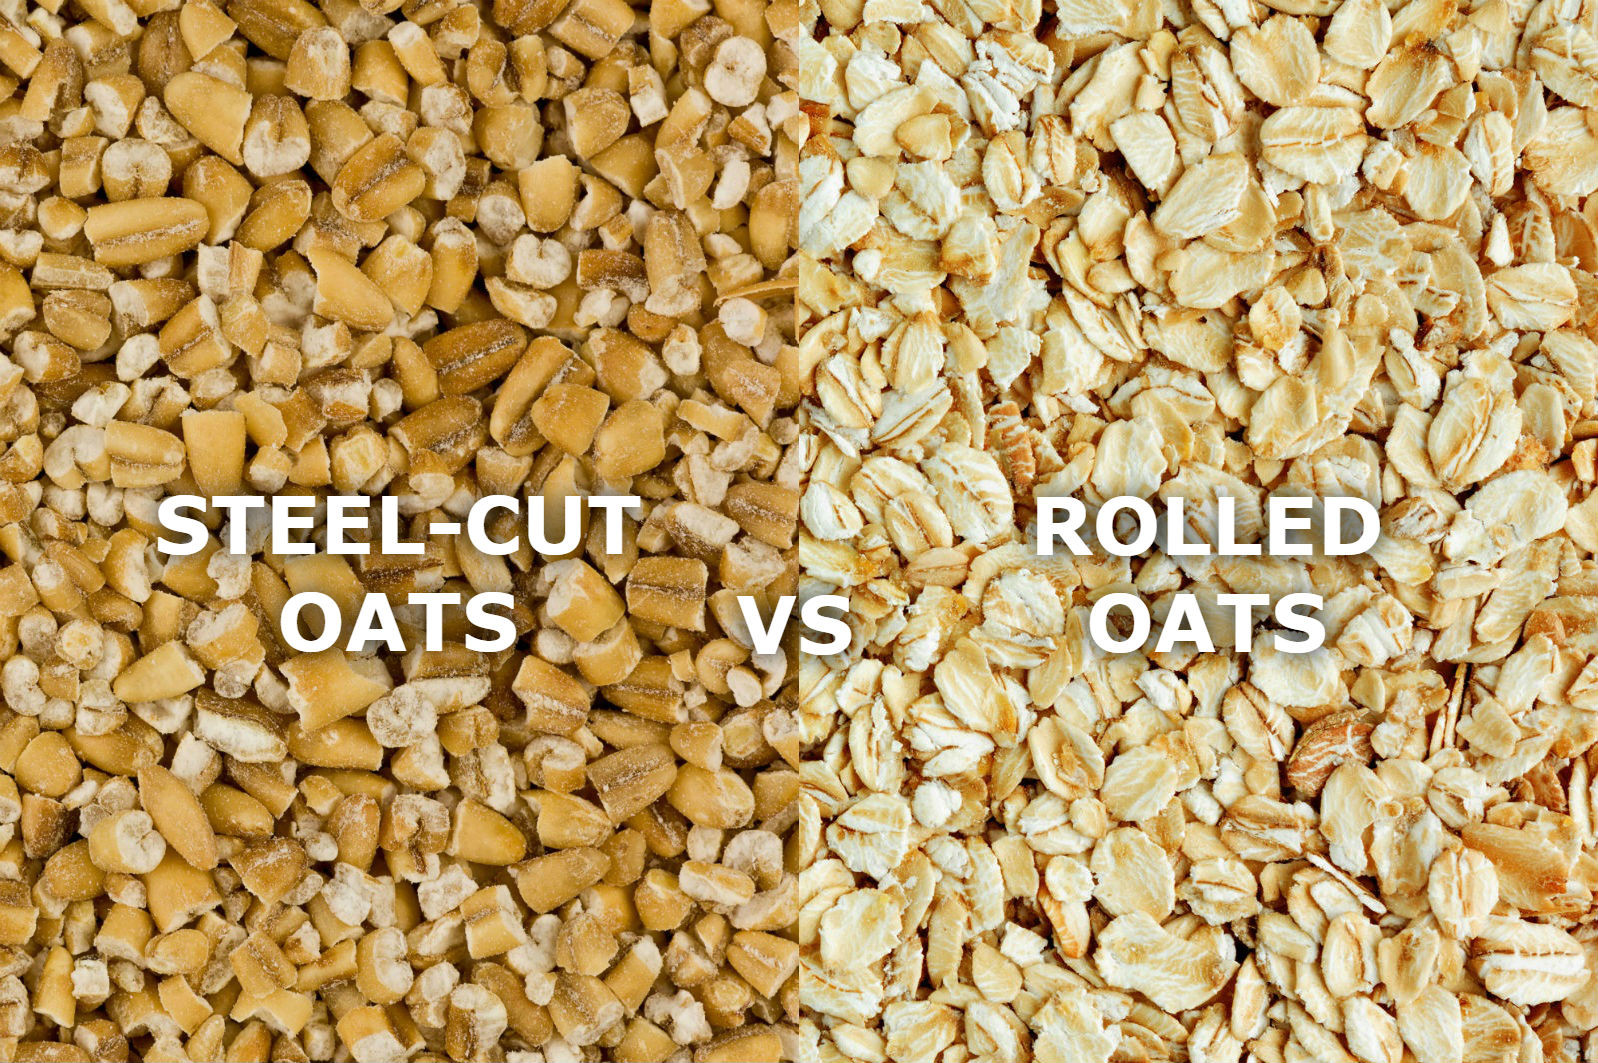 Are Rolled Oats Healthy
 ARE STEEL CUT OATS HEALTHIER THAN ROLLED OATS SPUD